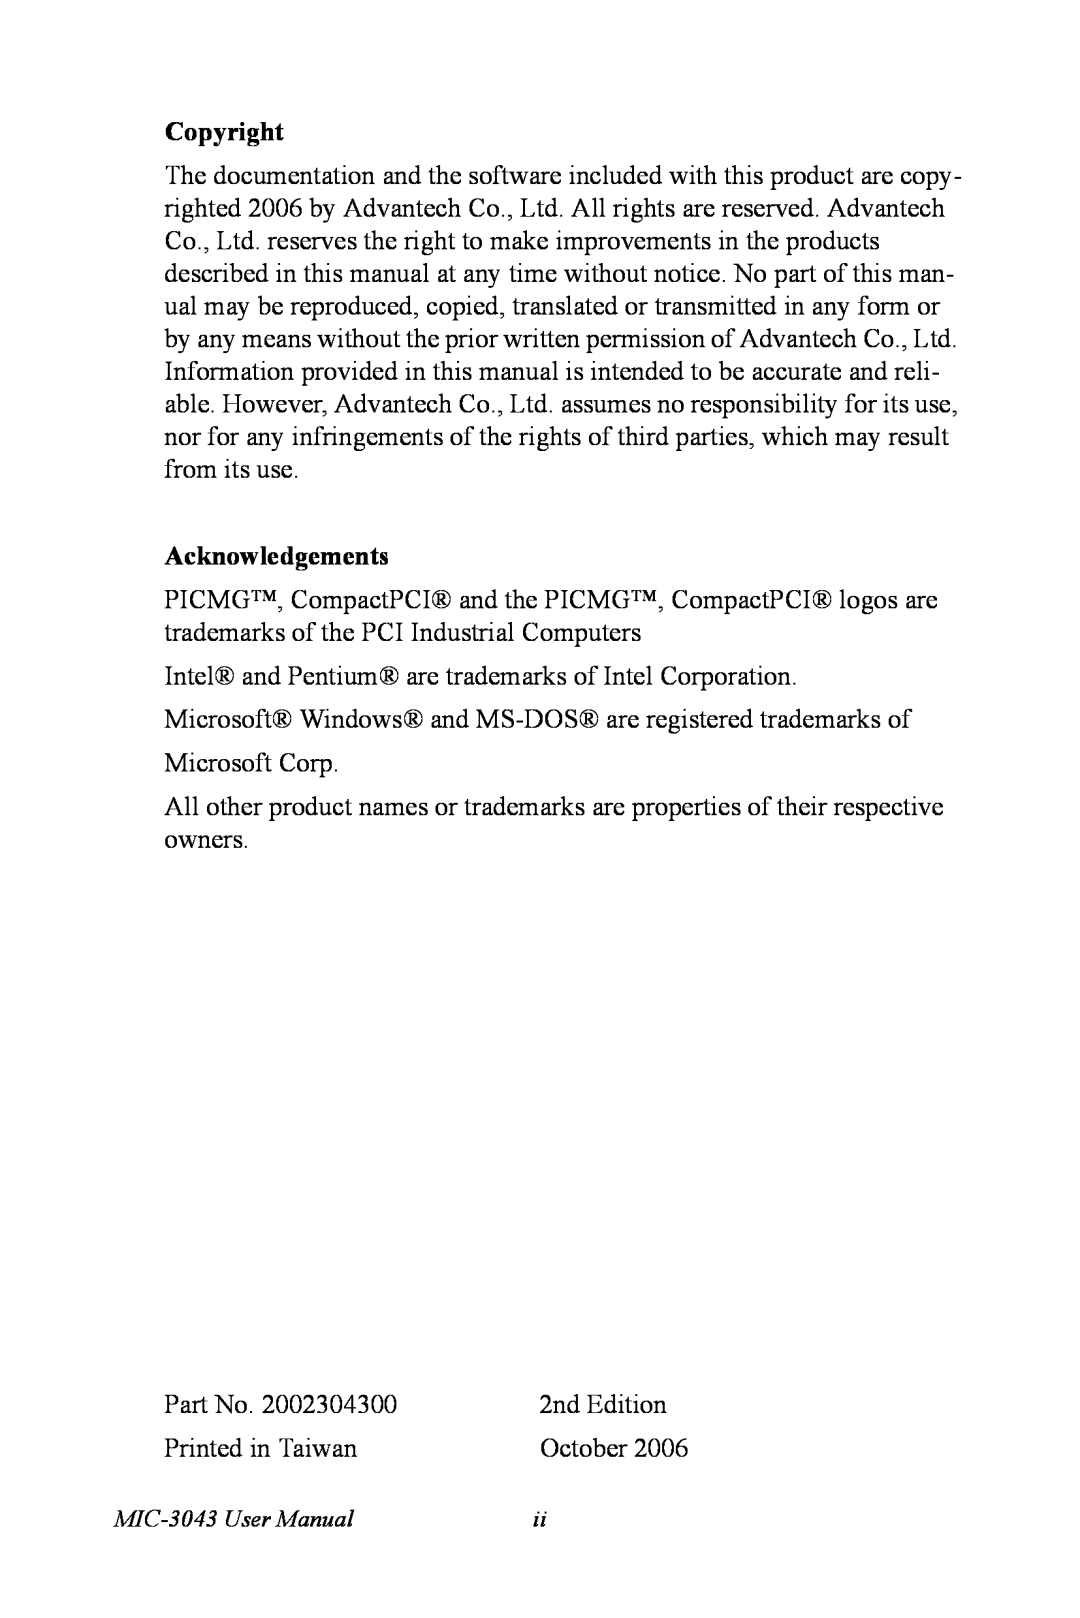 Advantech user manual Copyright, Acknowledgements, 2nd Edition, Printed in Taiwan, October, MIC-3043 User Manual 